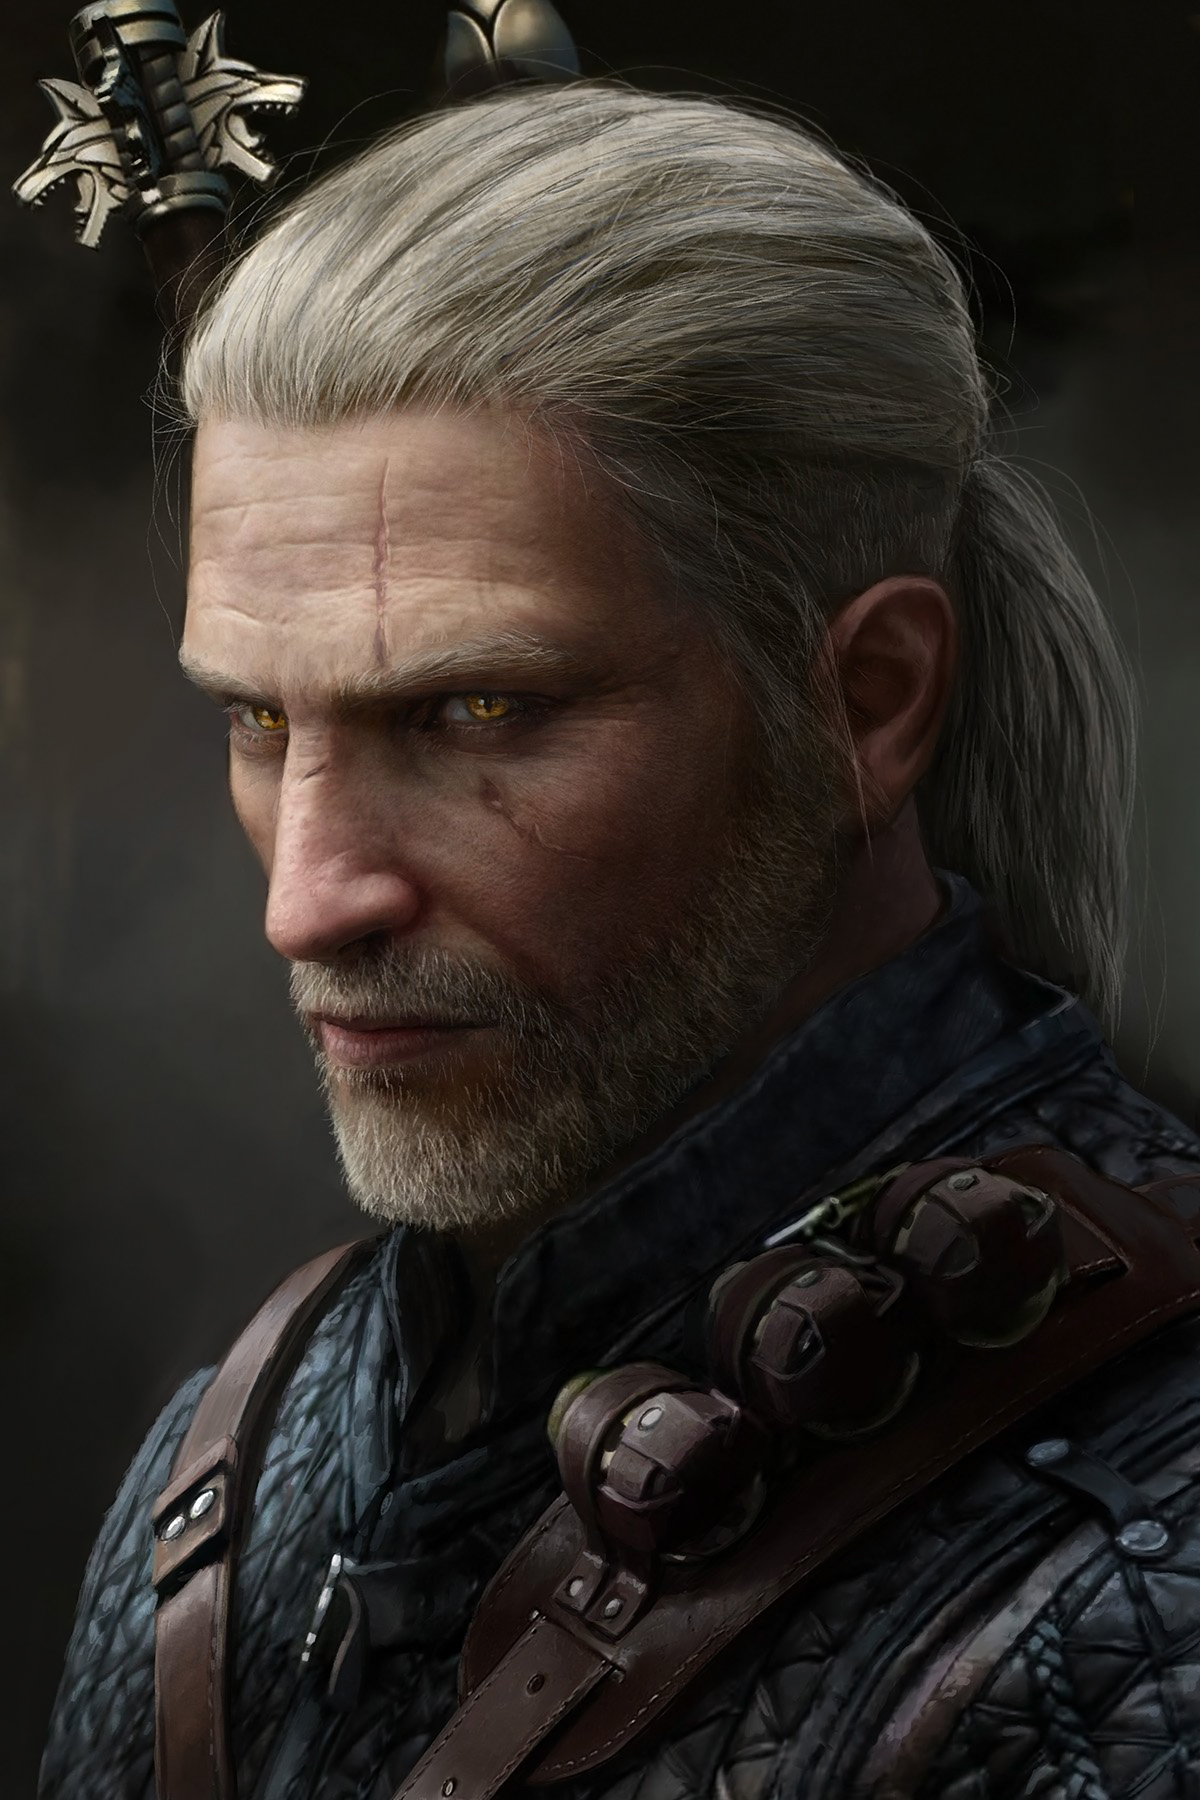 General 1200x1800 drawing The Witcher Geralt of Rivia men warrior silver hair long hair ponytail scars yellow eyes looking away beard armor portrait